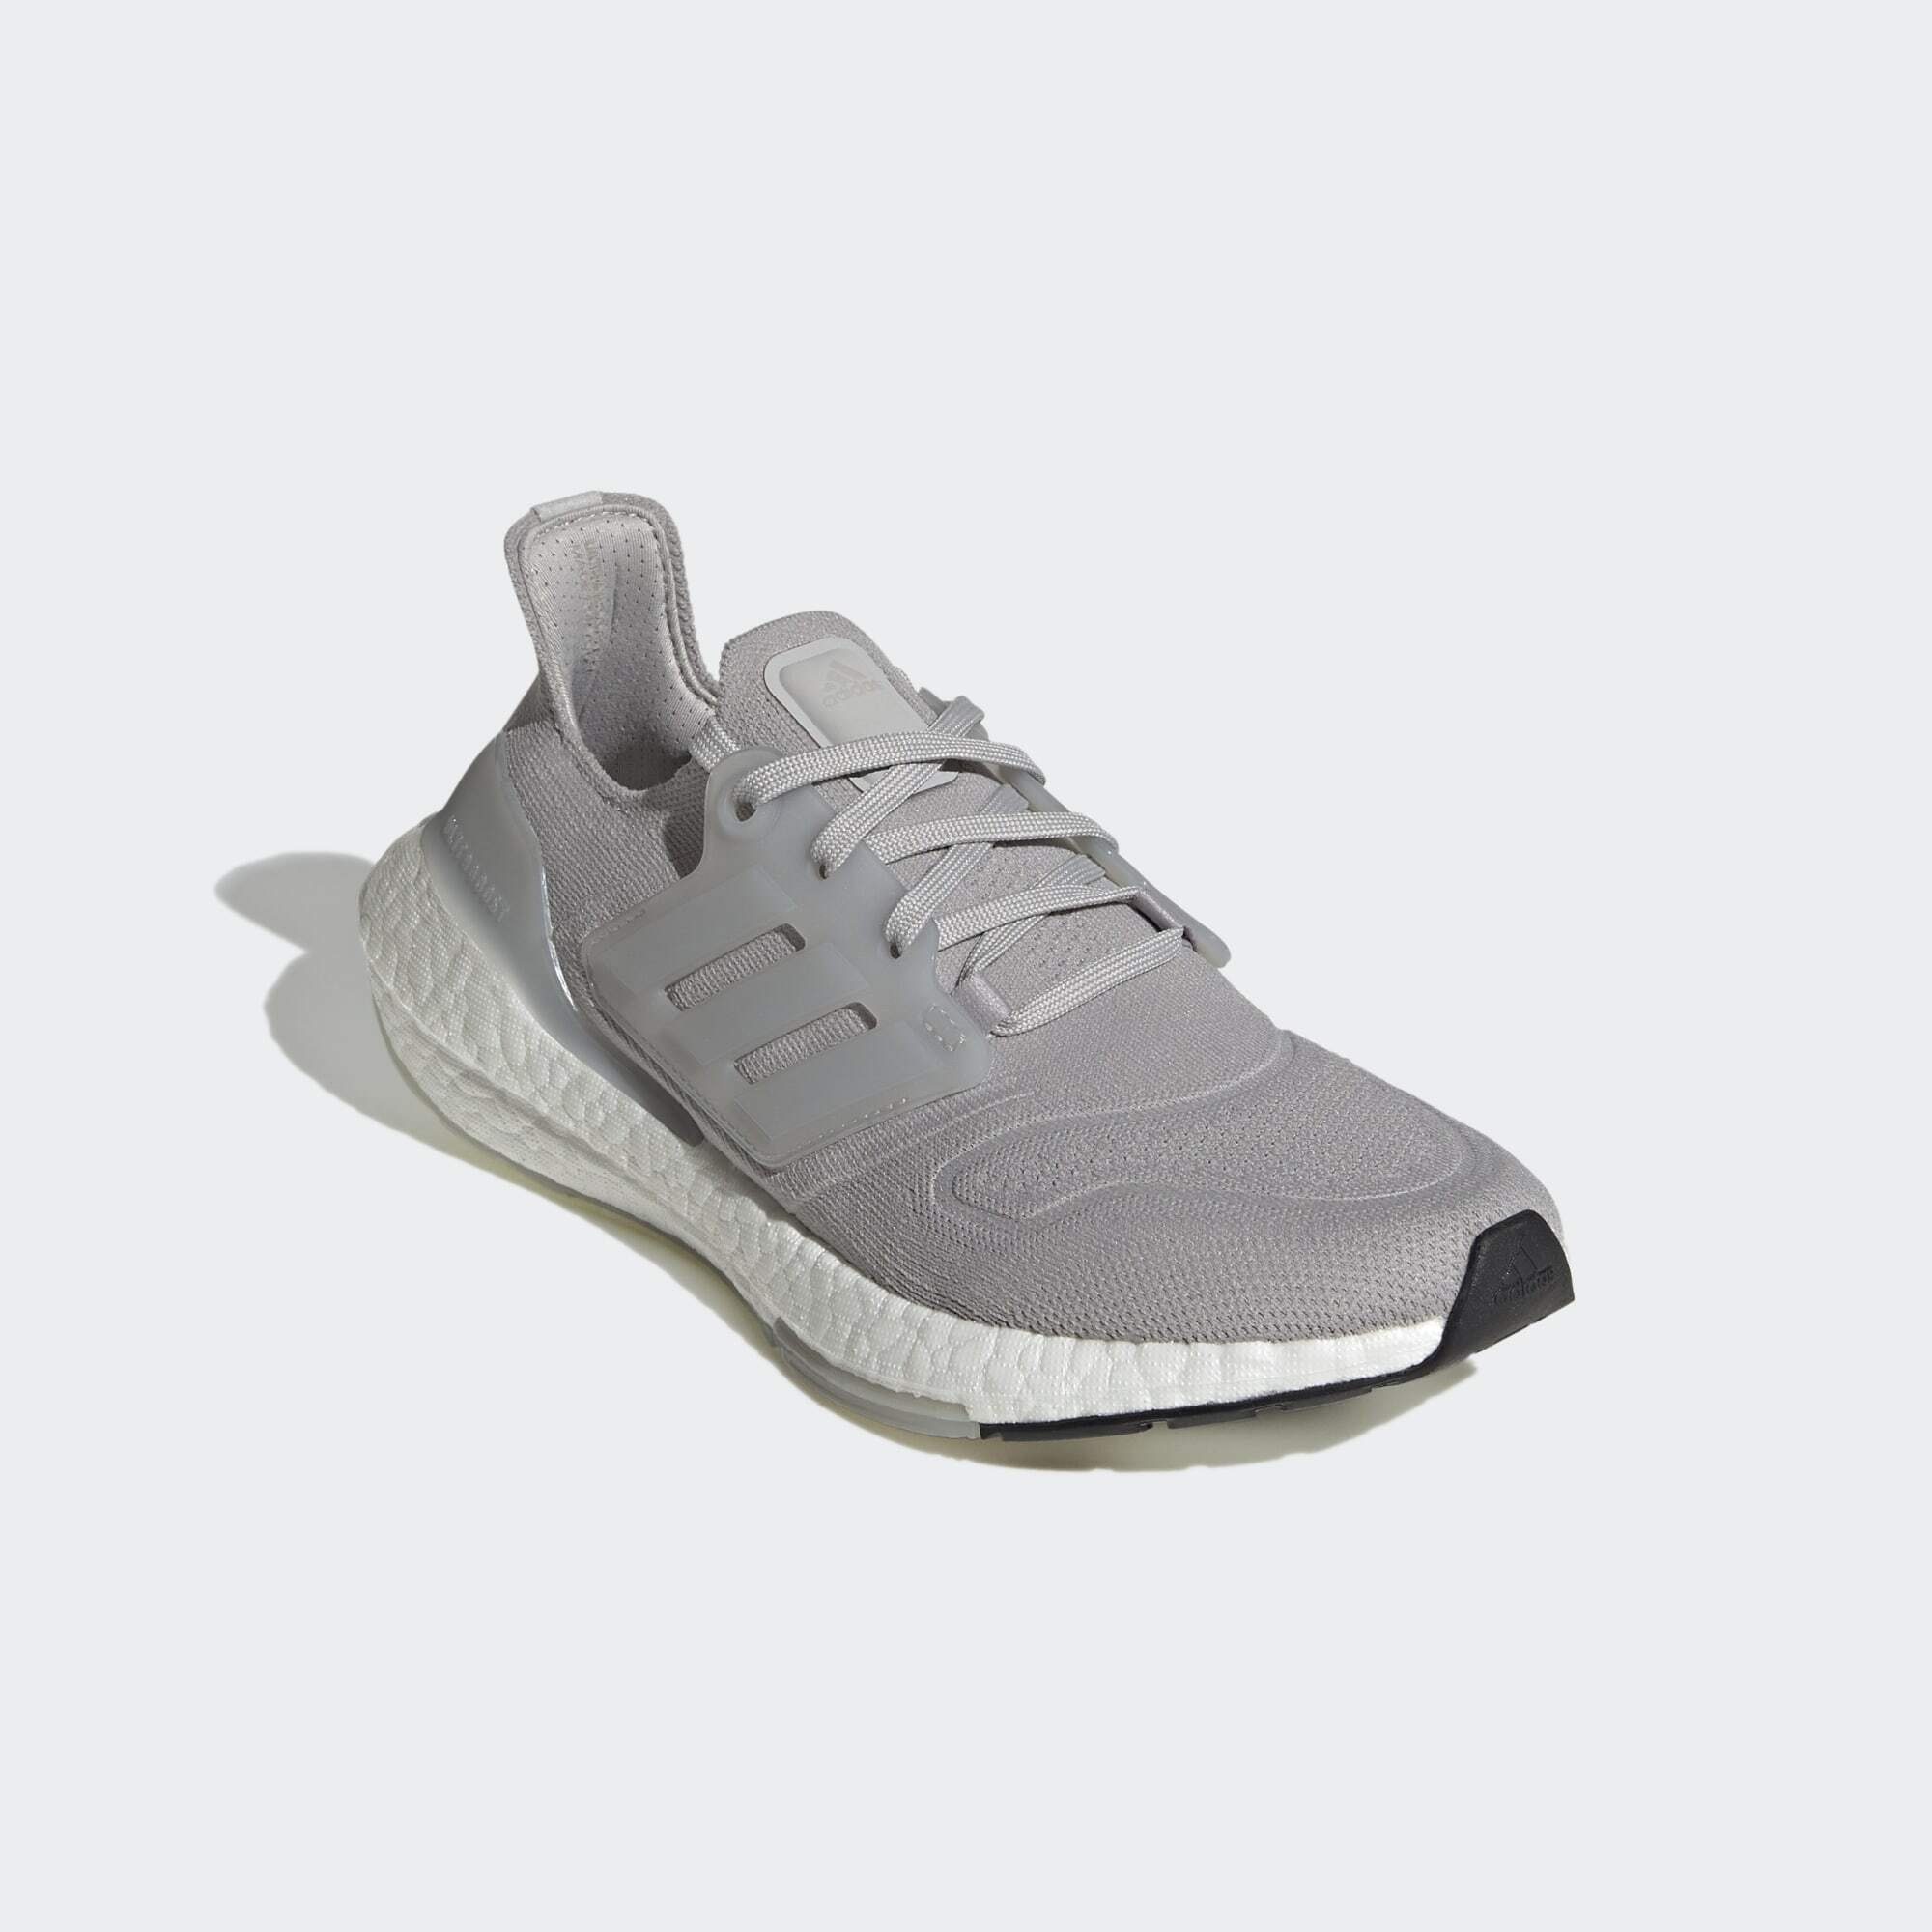 22 ULTRABOOST Grey Two / Sneaker adidas / Two LAUFSCHUH Grey Two Grey Performance